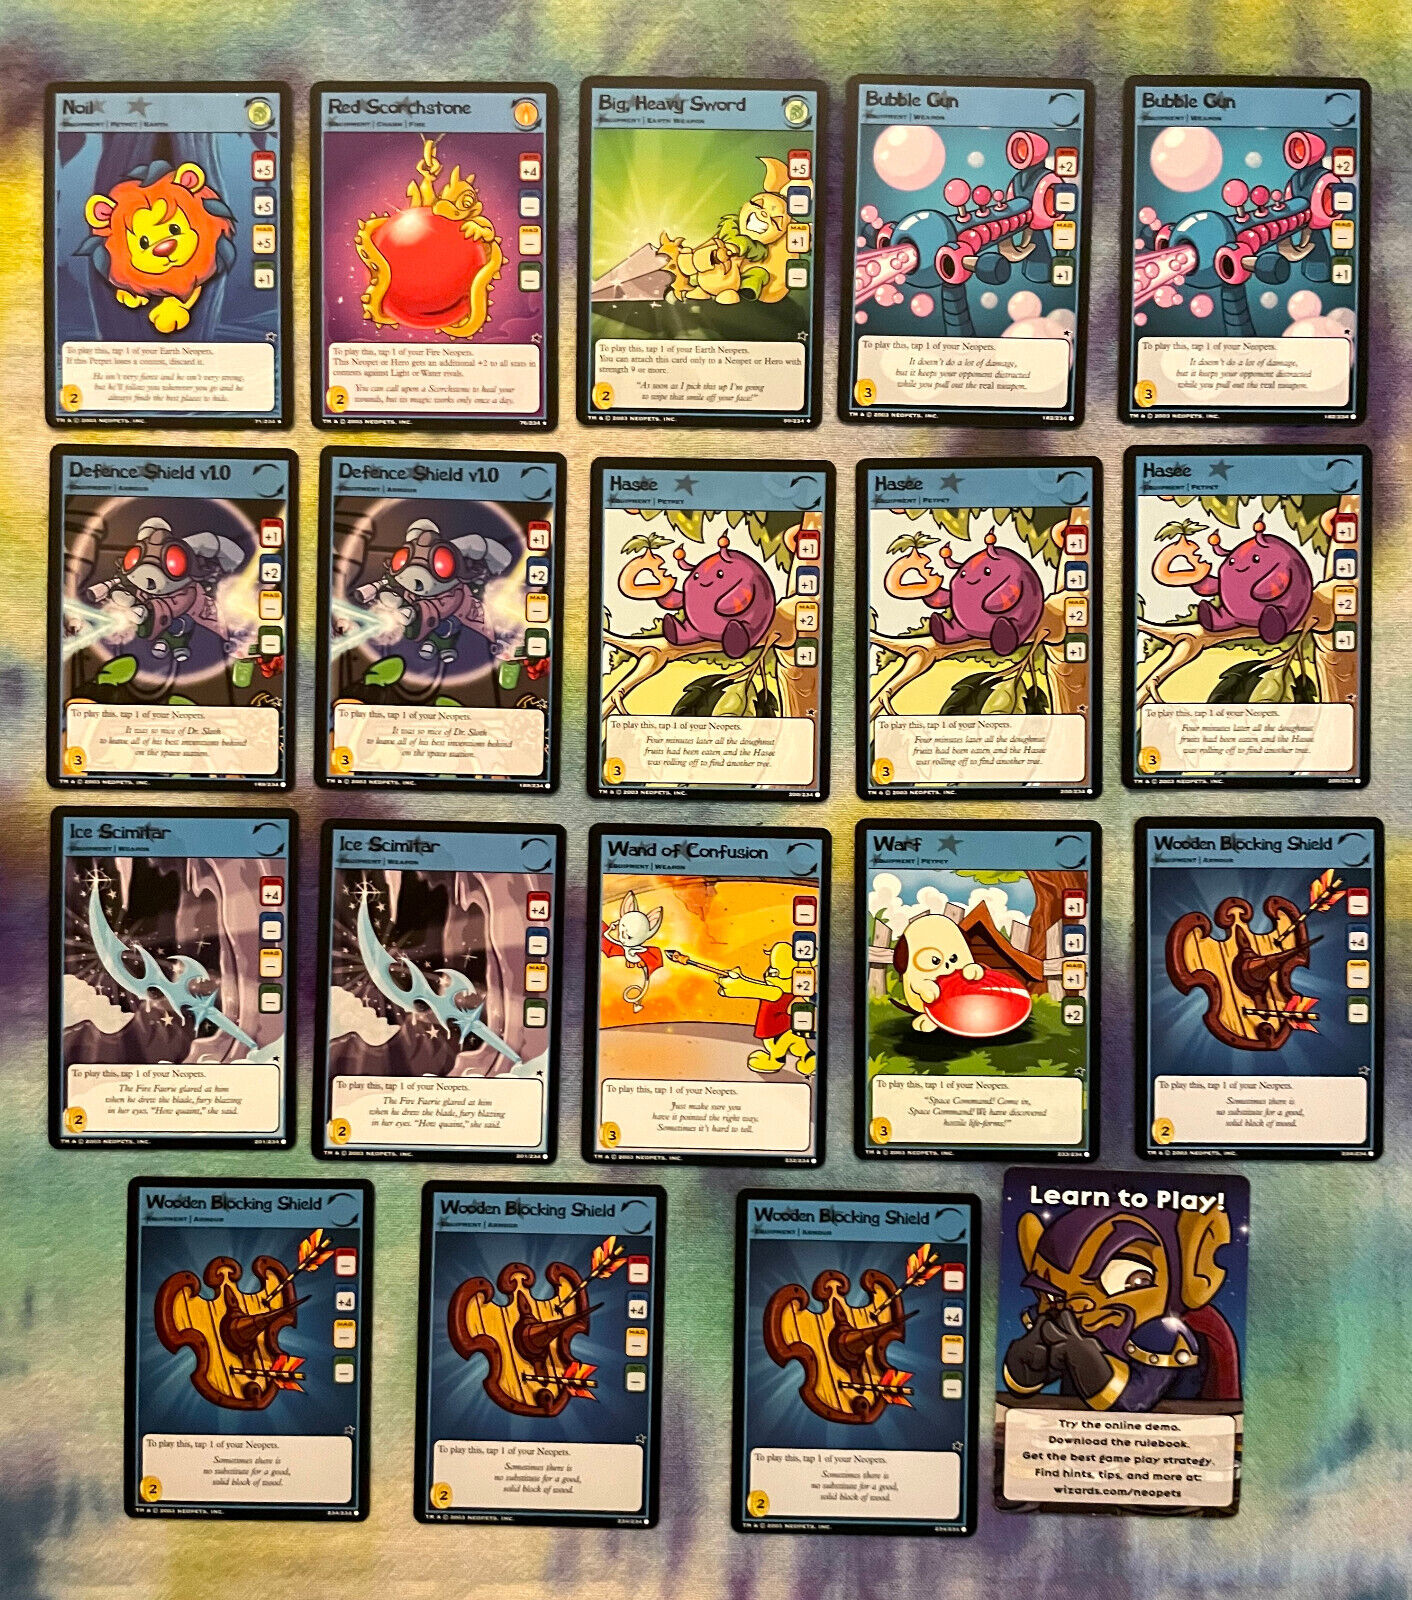 Lot of 19 NEOPETS 2003 TCG Blue Cards from 234 Base (see list) w/plastic sleeves